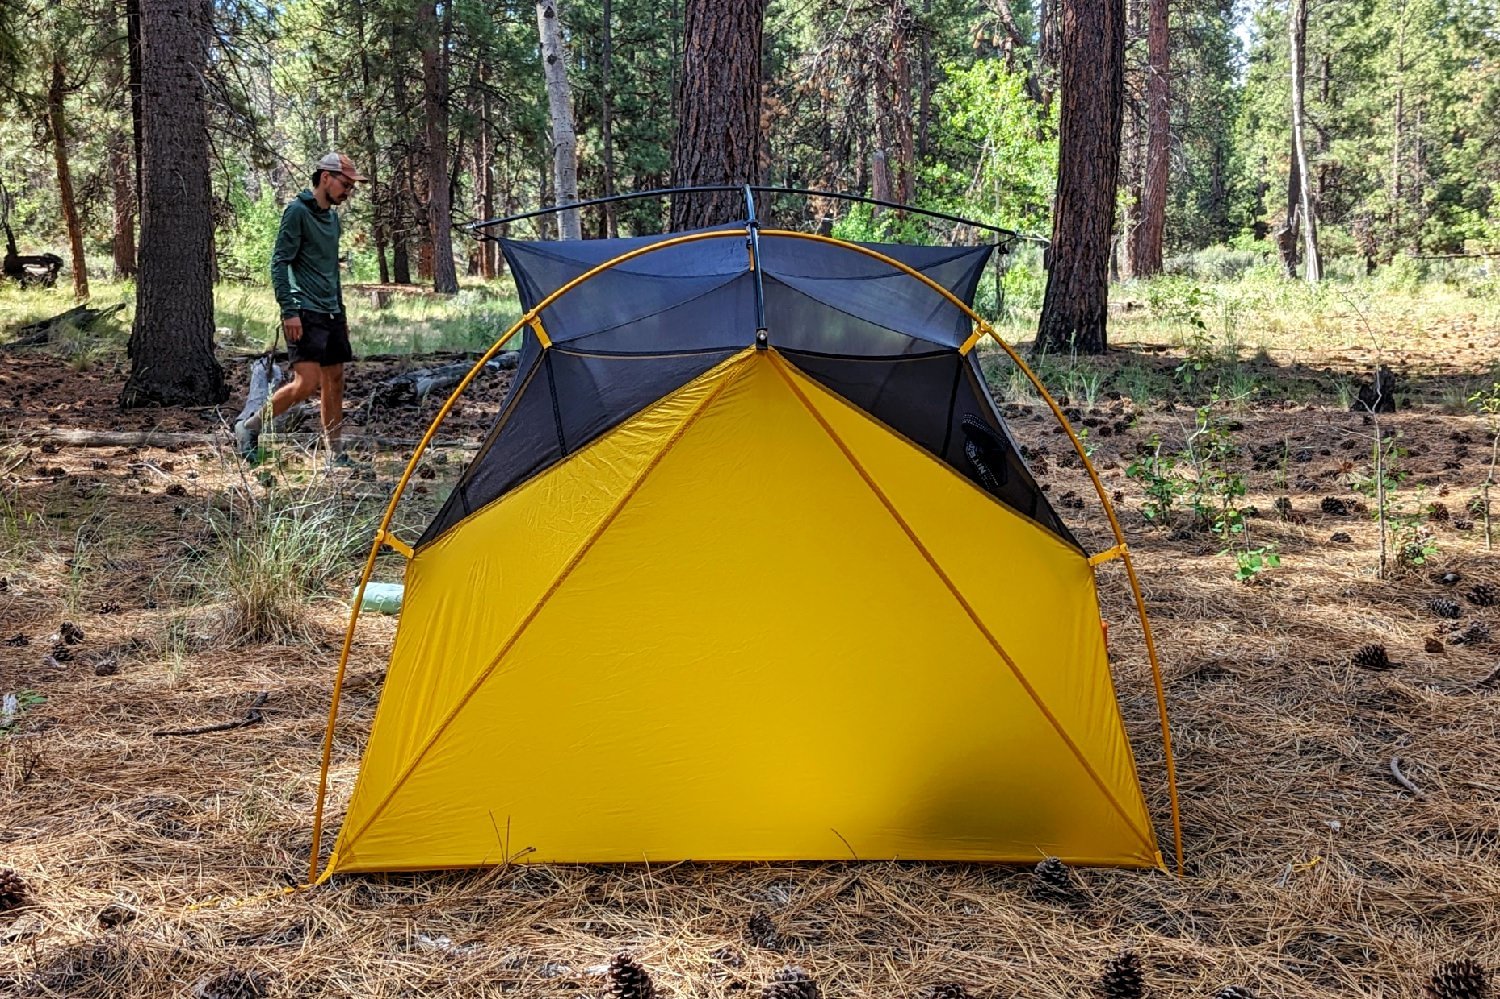 An outside view of the REI Flash 2 Tent showing the arch pole that pulls out the headwall